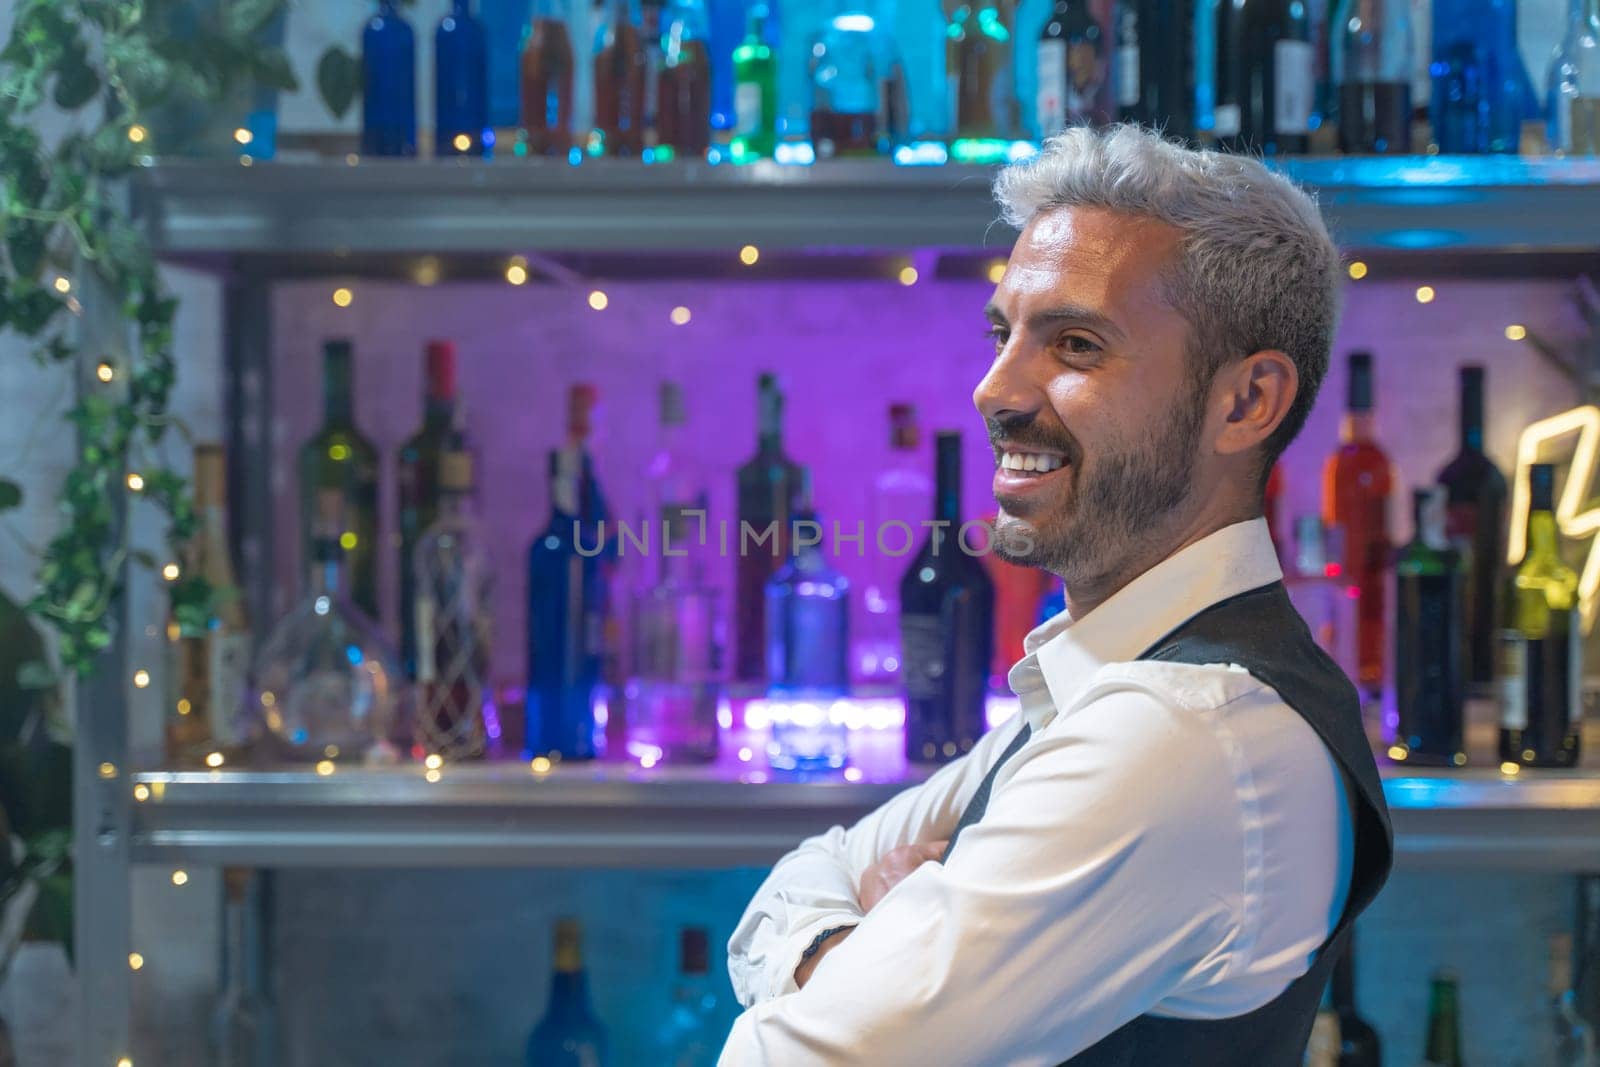 Barman portrait in a white shirt and black apron smiling at nightclub. by PaulCarr